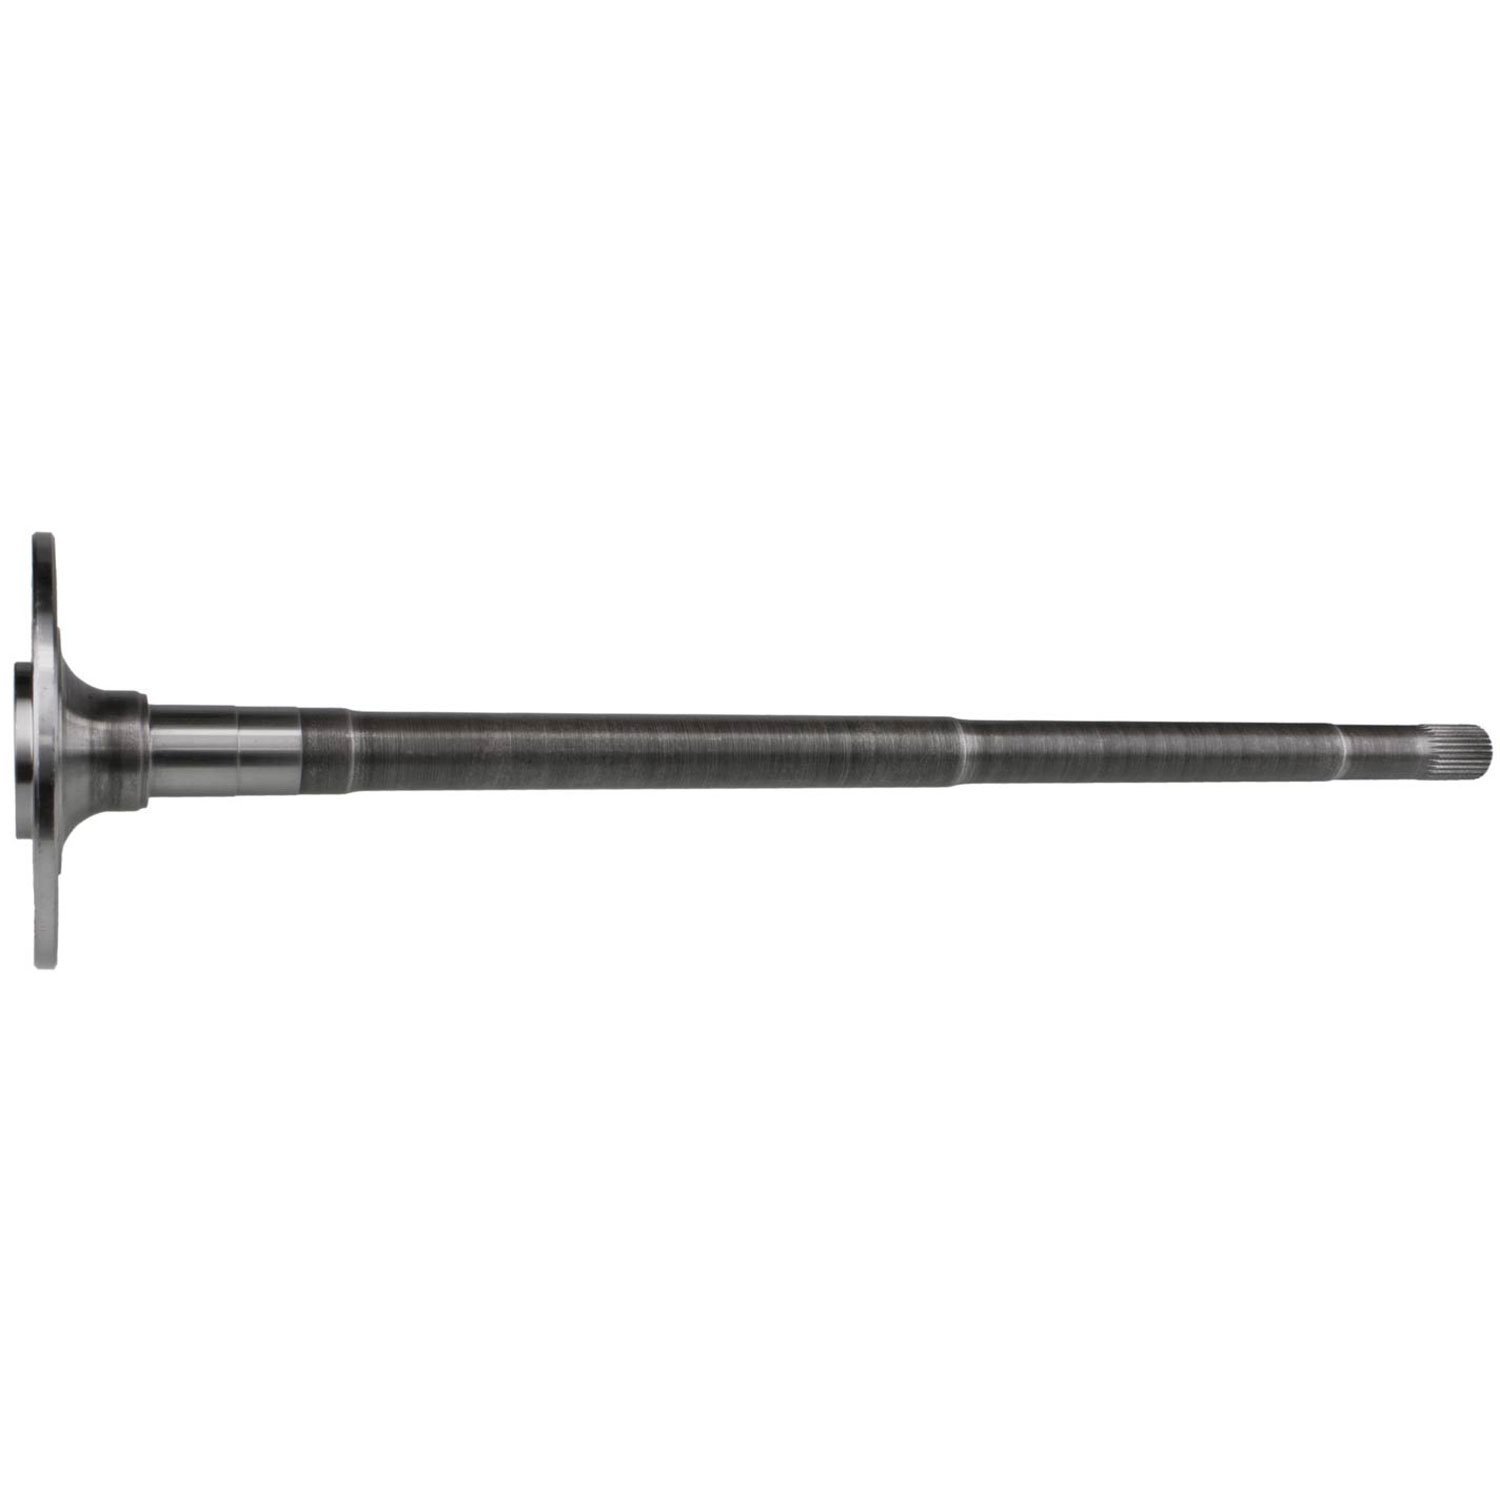 Axle Shaft Large Bearing 29 5/16 in. Overall Length 5 Lugs 28 Spline